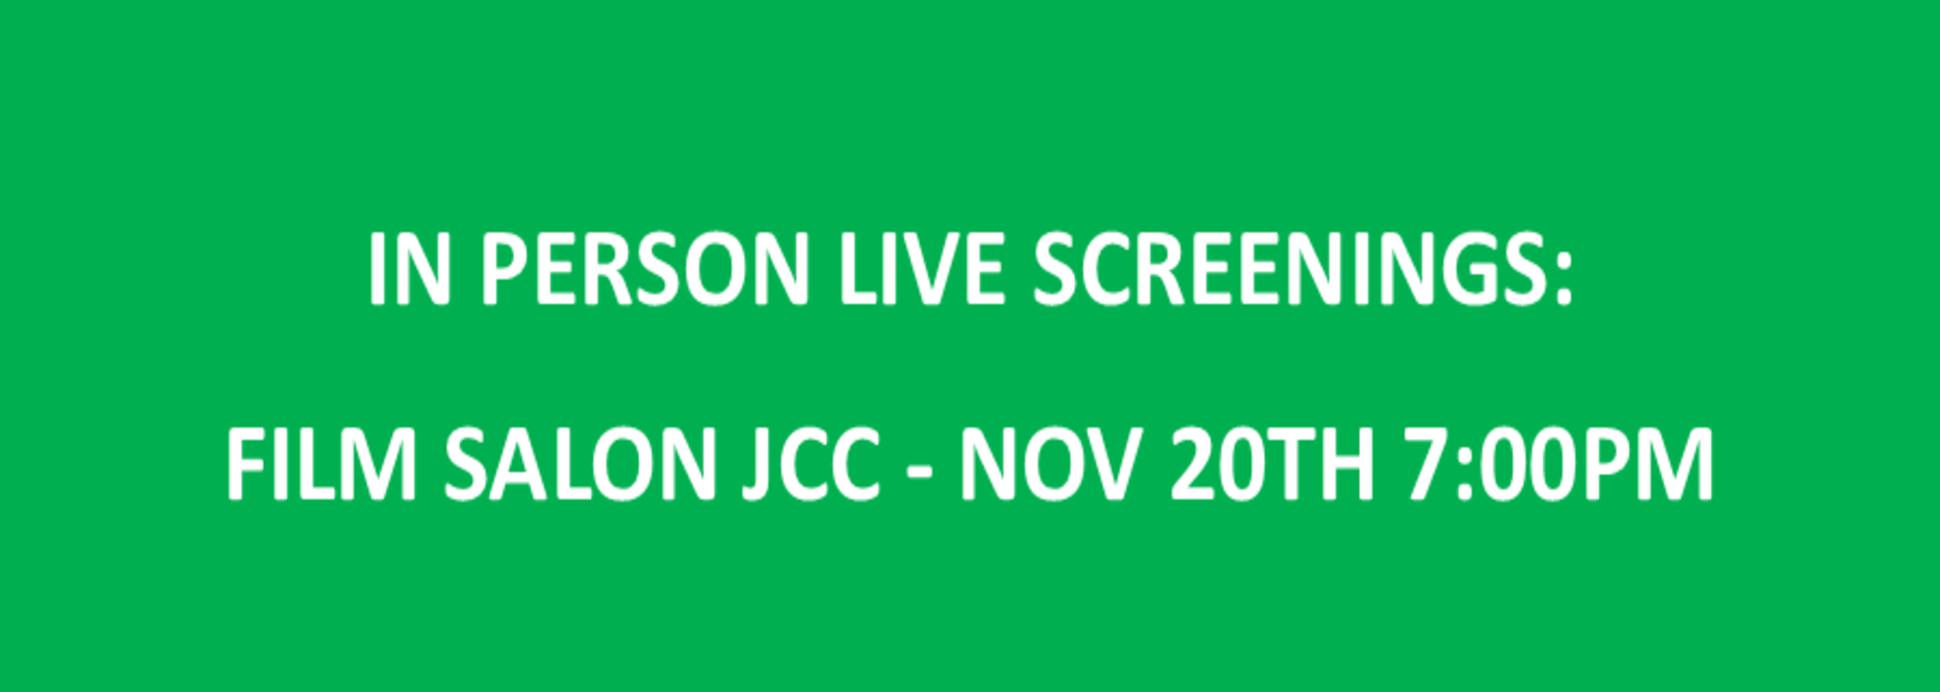 IN PERSON LIVE SCREENINGS: THE FILM SALON AT THE JCC